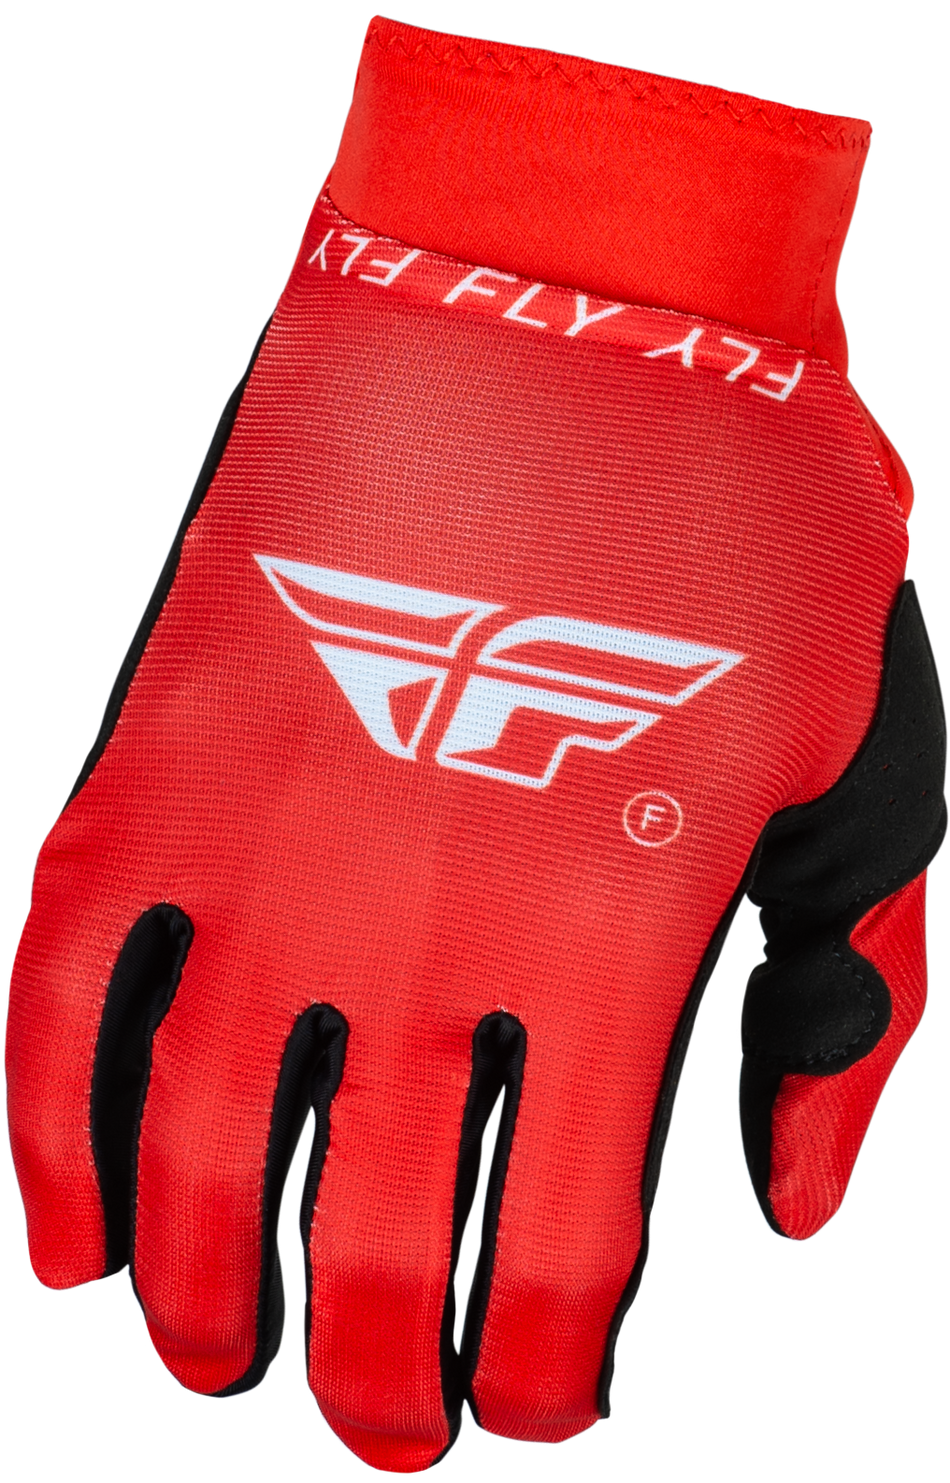 FLY RACING Pro Lite Gloves Red/White Sm 377-044S